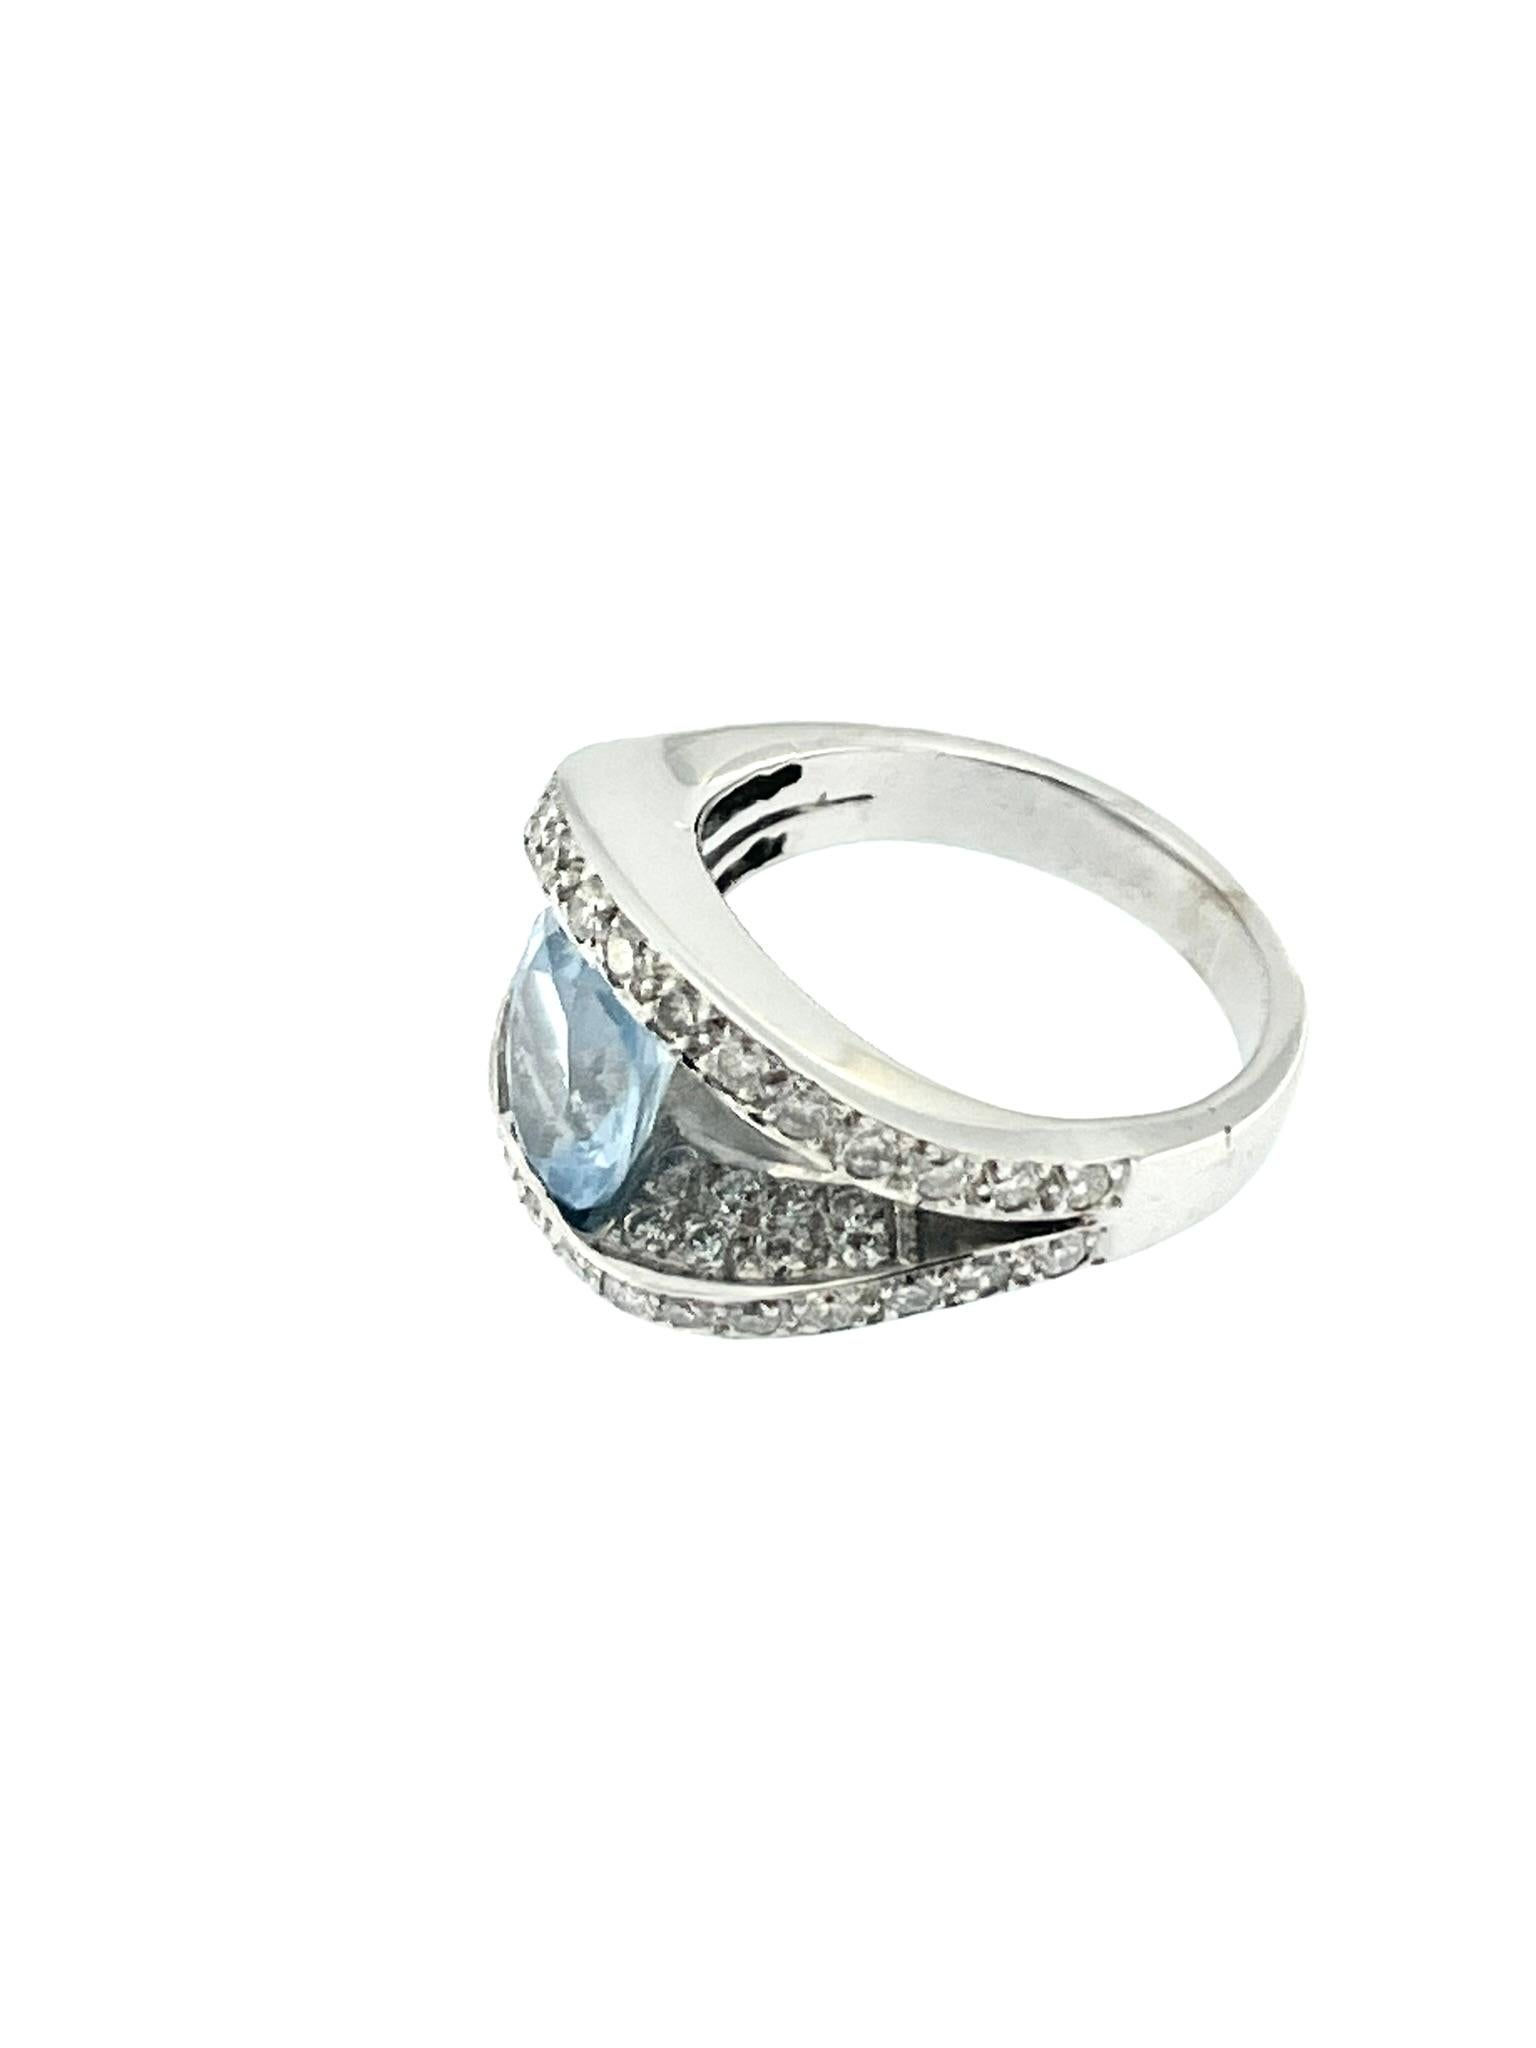 Women's or Men's Modern French White Gold Ring with Diamonds and Aquamarine For Sale